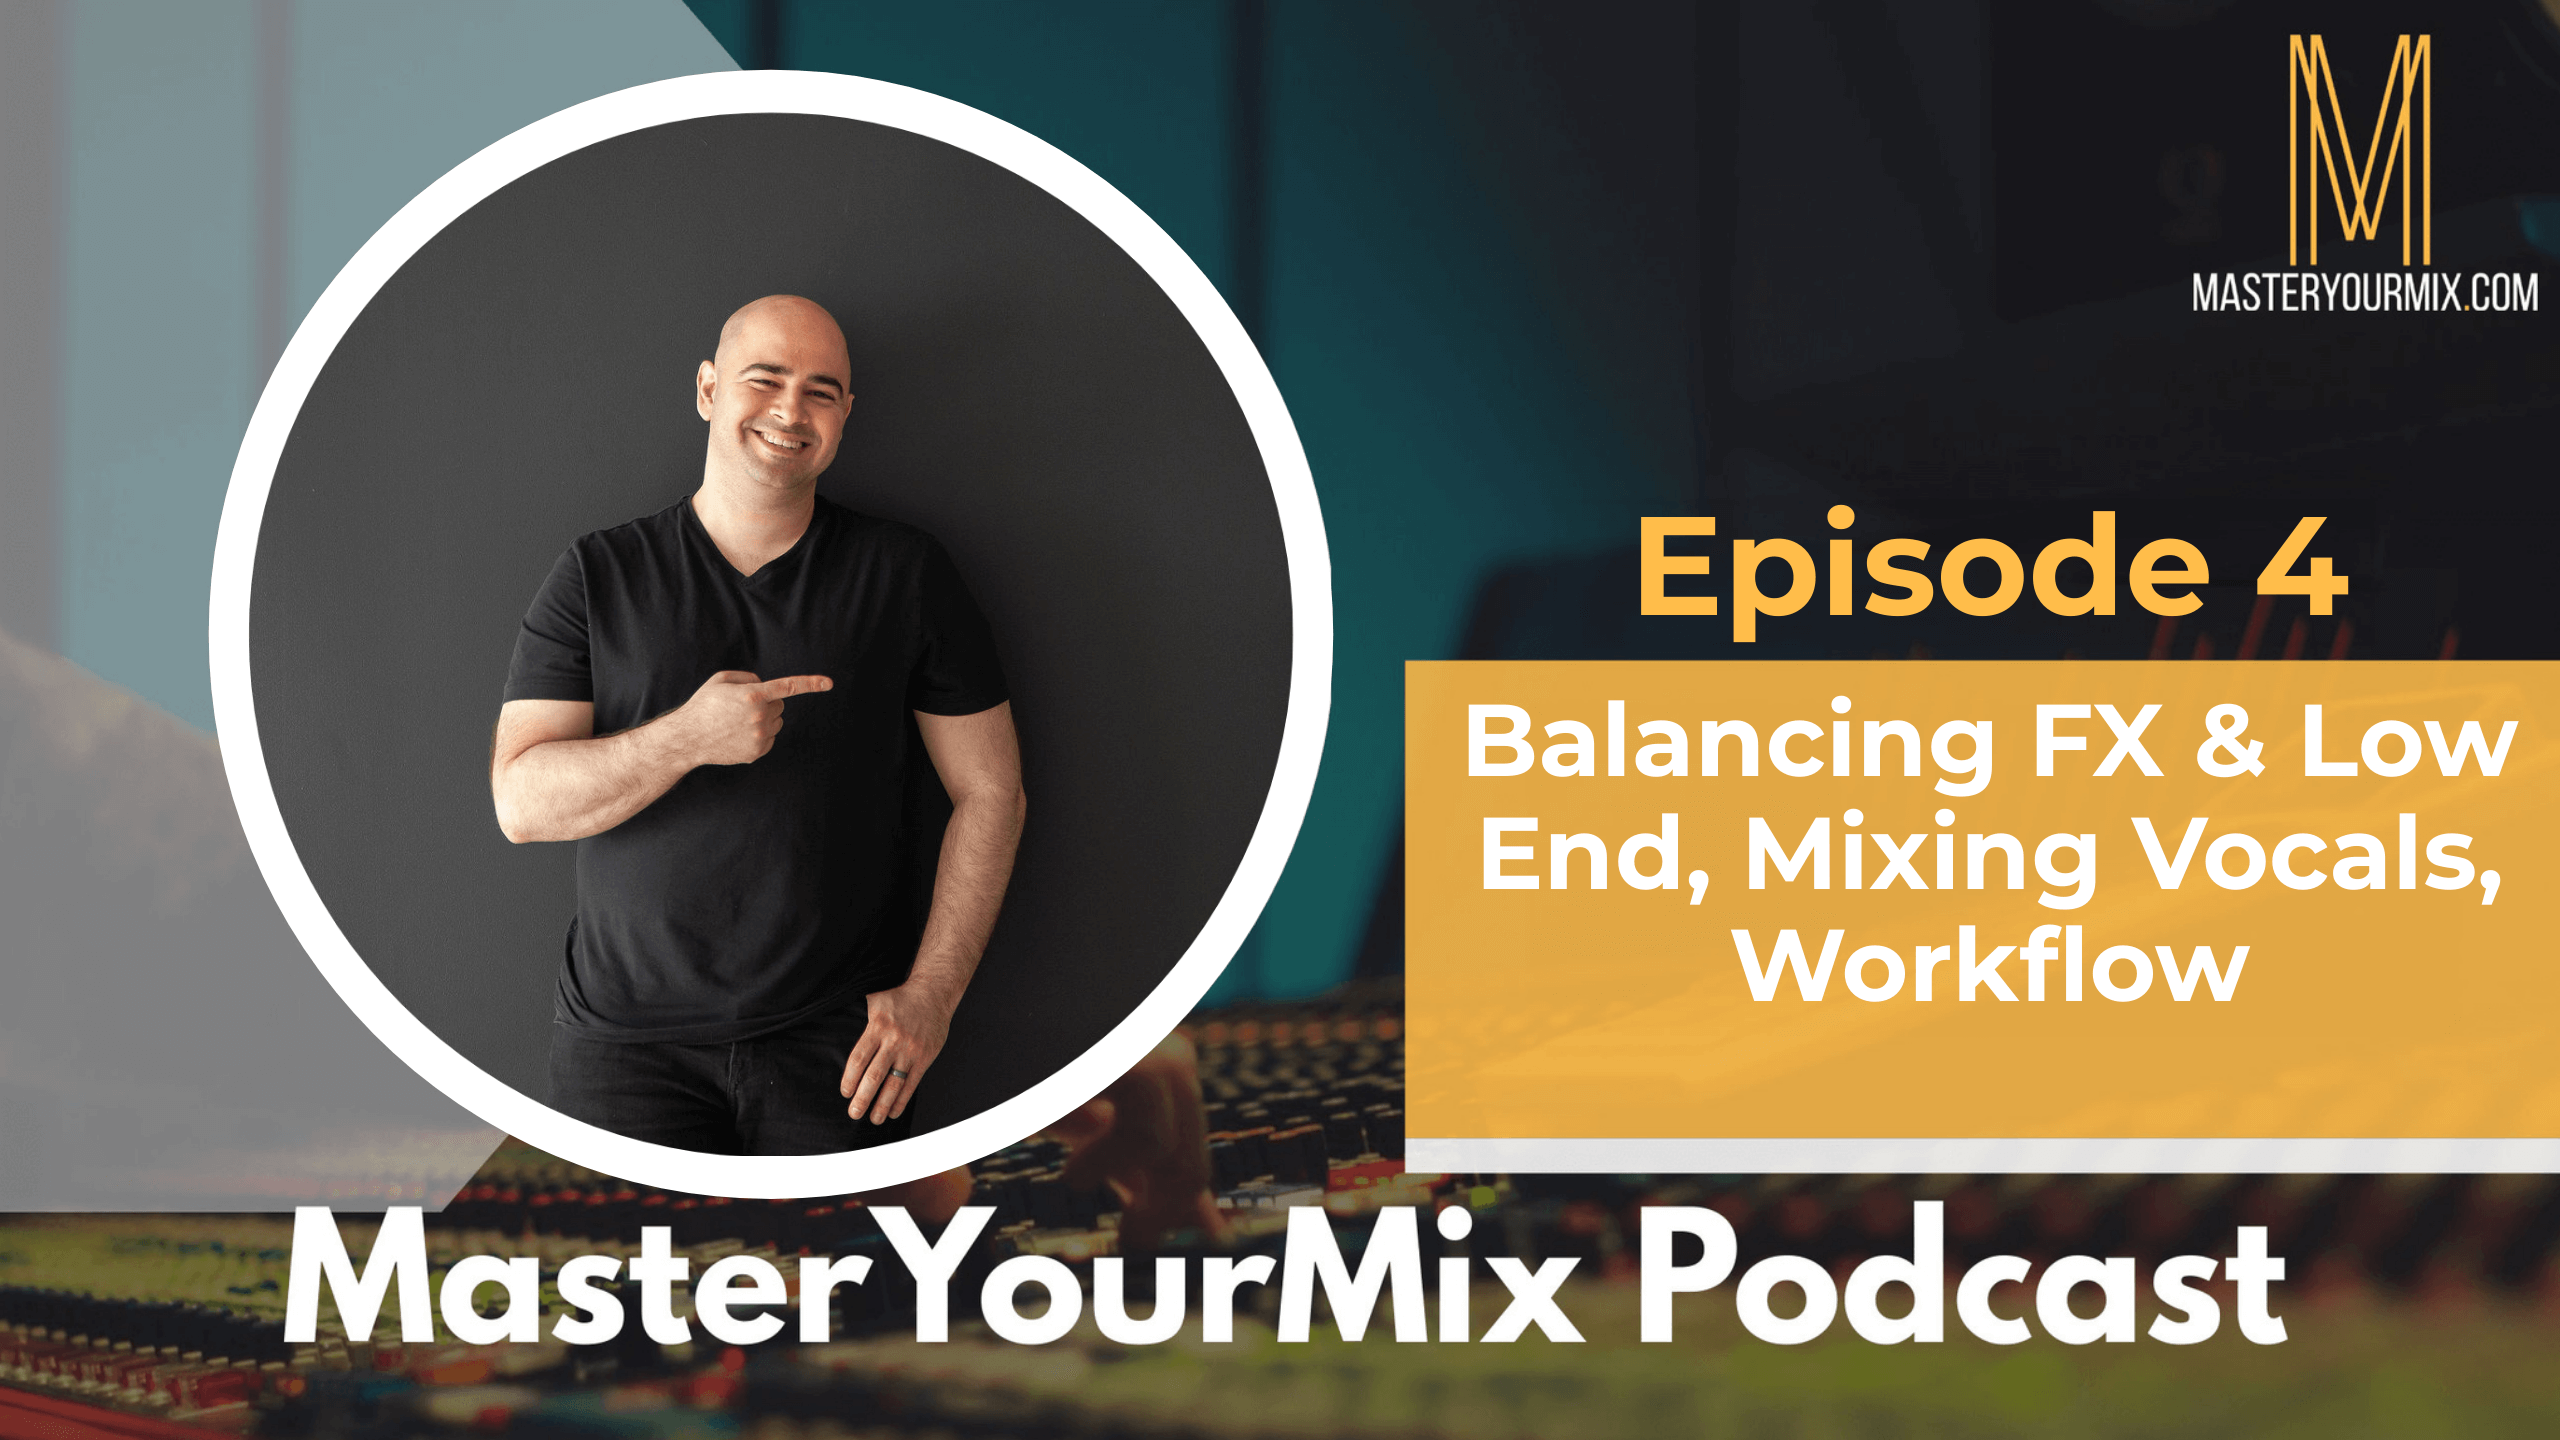 master your mix podcast, ep 4 mike indovina